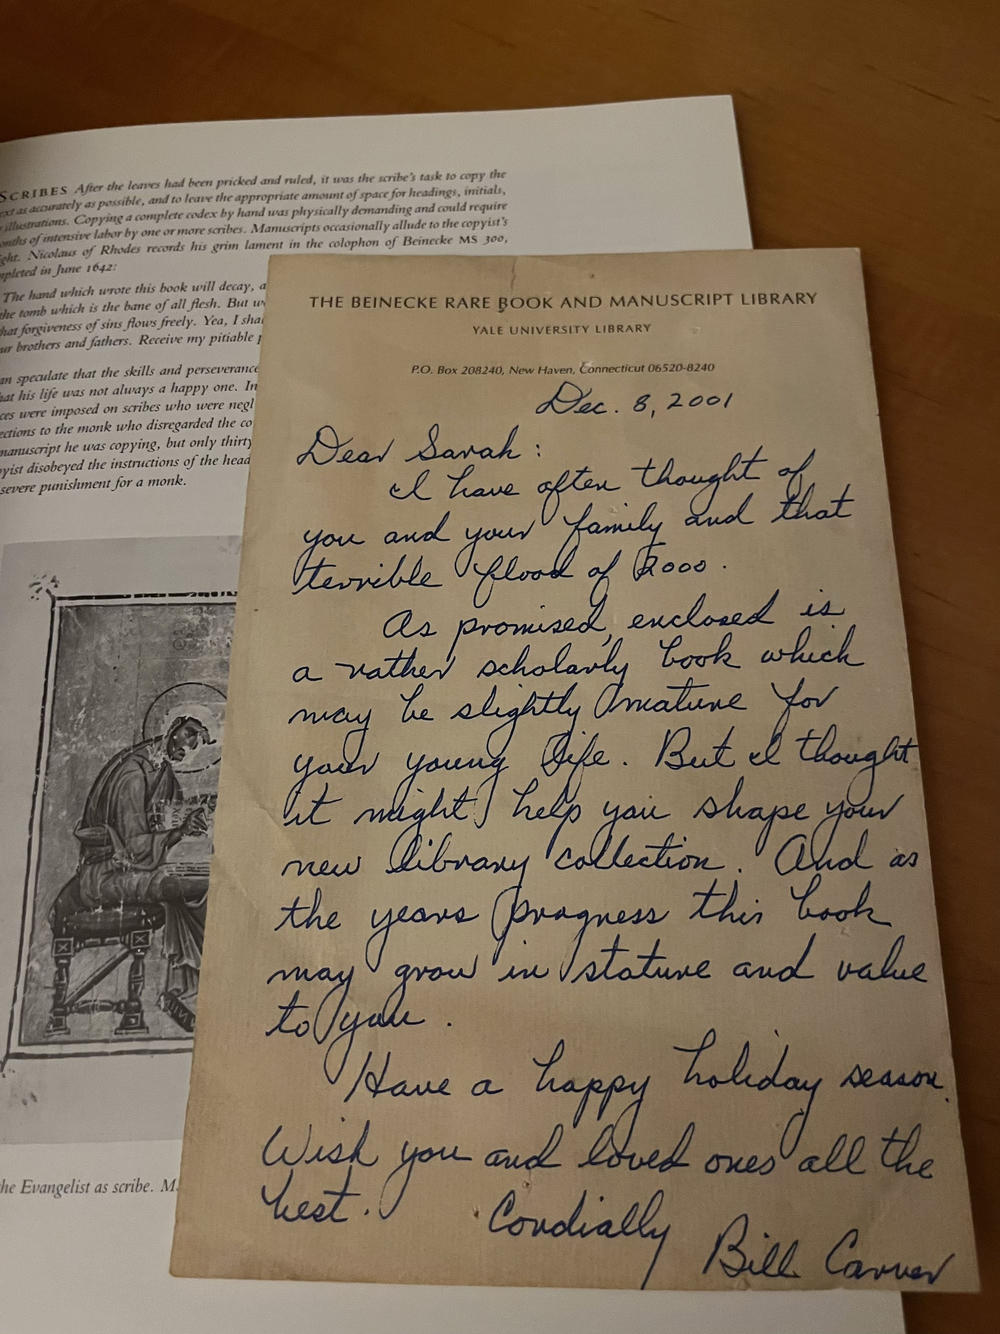 The letter Feldman received from Bill Carver along with a copy of <em>The Medieval Book</em> by Barbara A. Shailor.